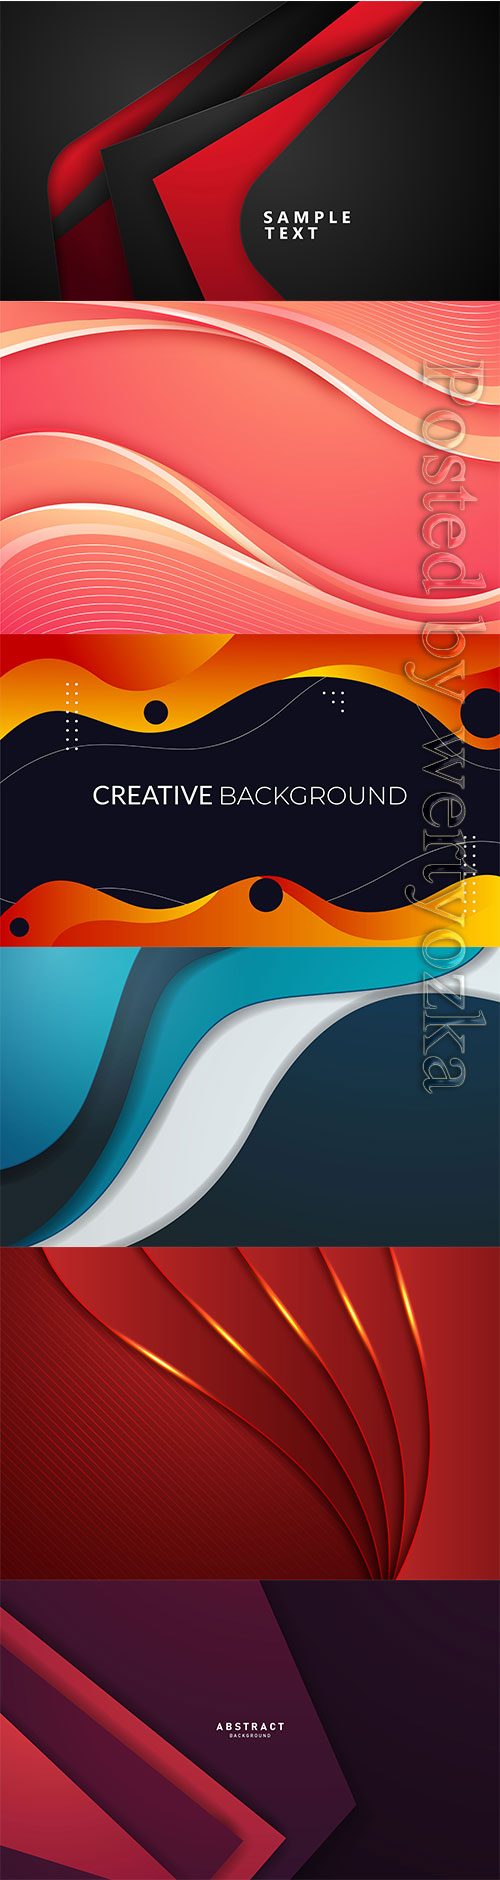 Colored abstract backgrounds with lines in vector